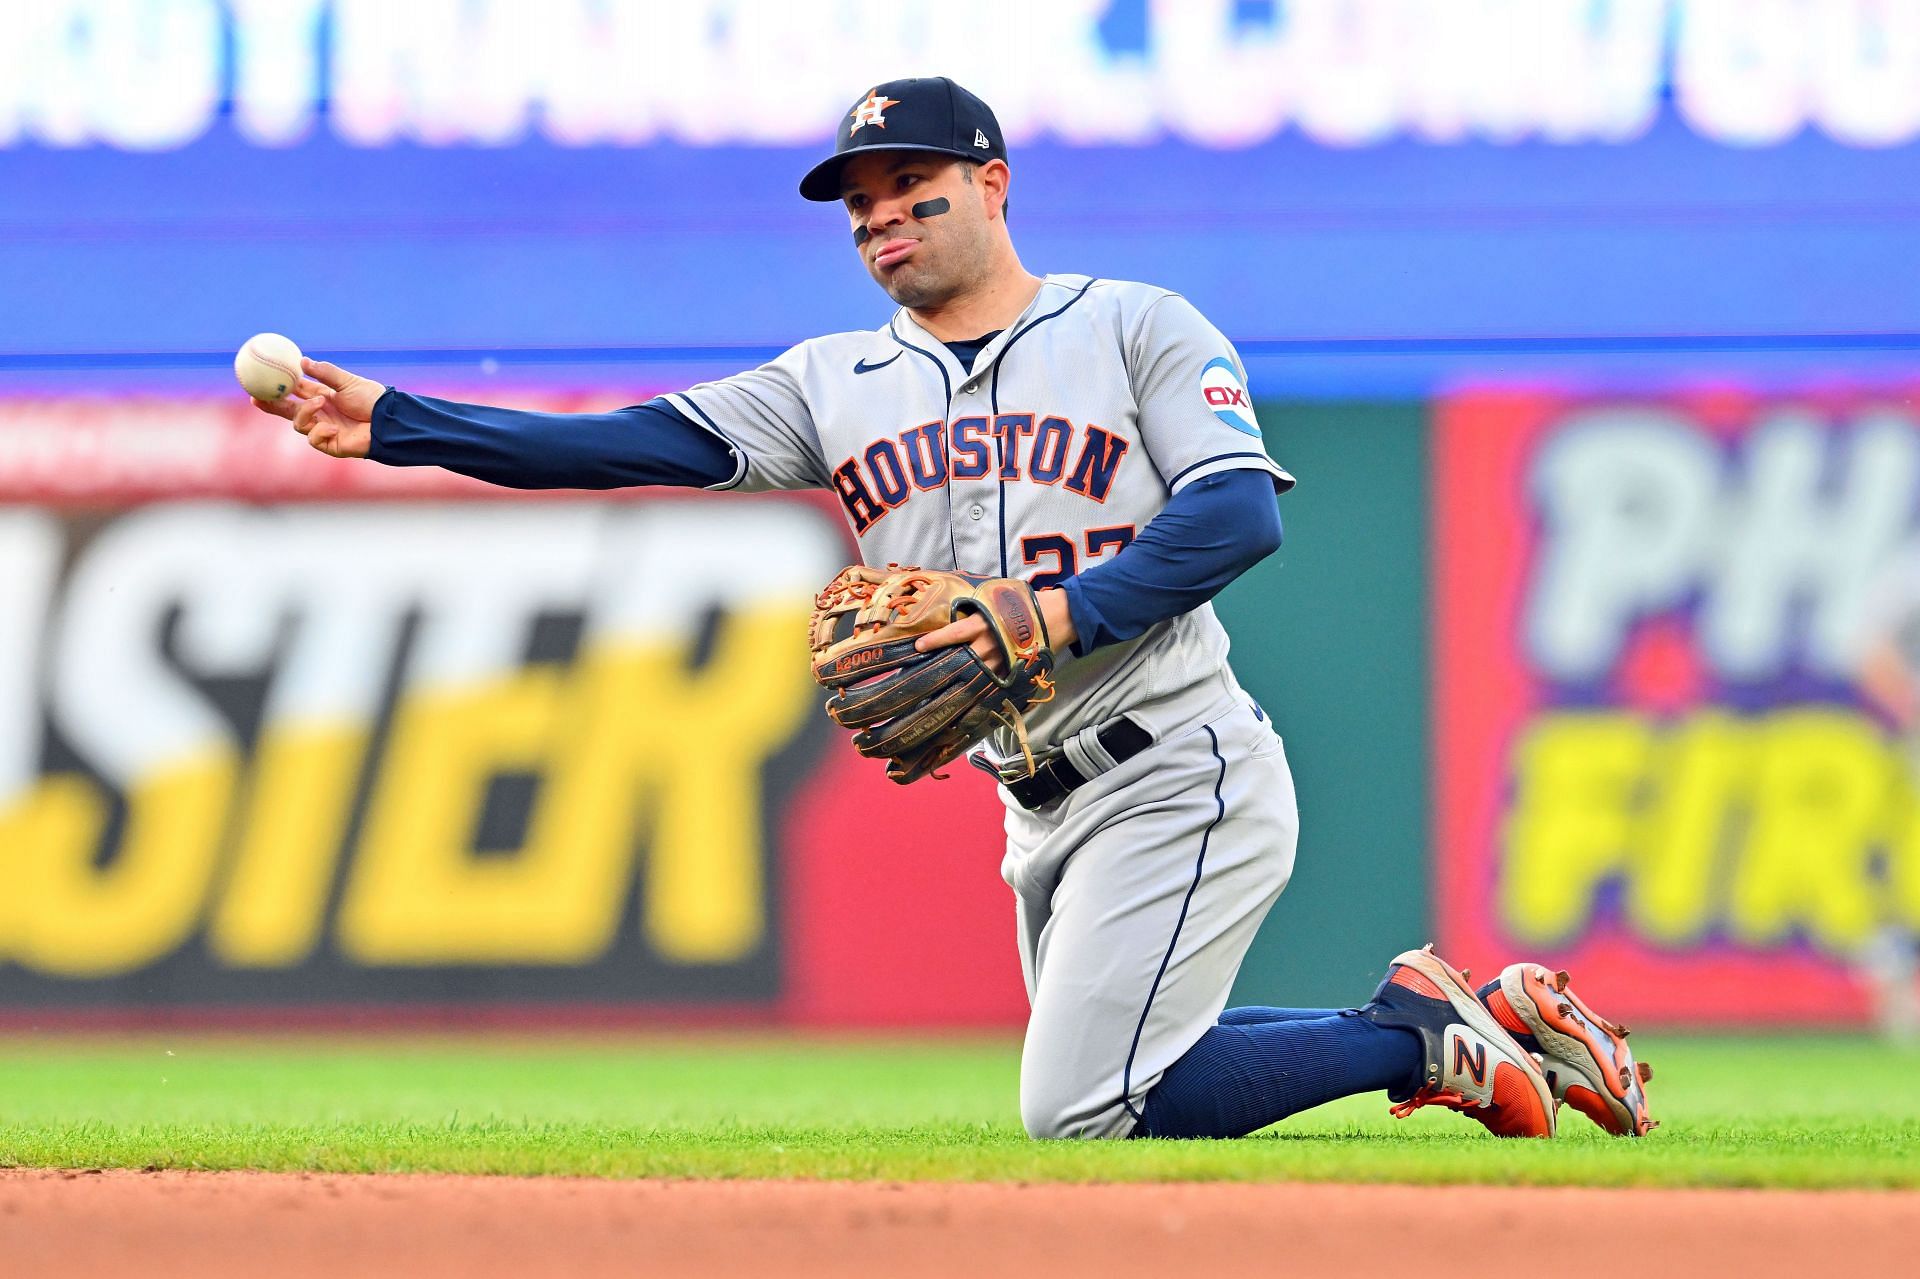 Second baseman Jose Altuve of the Houston Astros throws out Andres Gimenez at Progressive Field